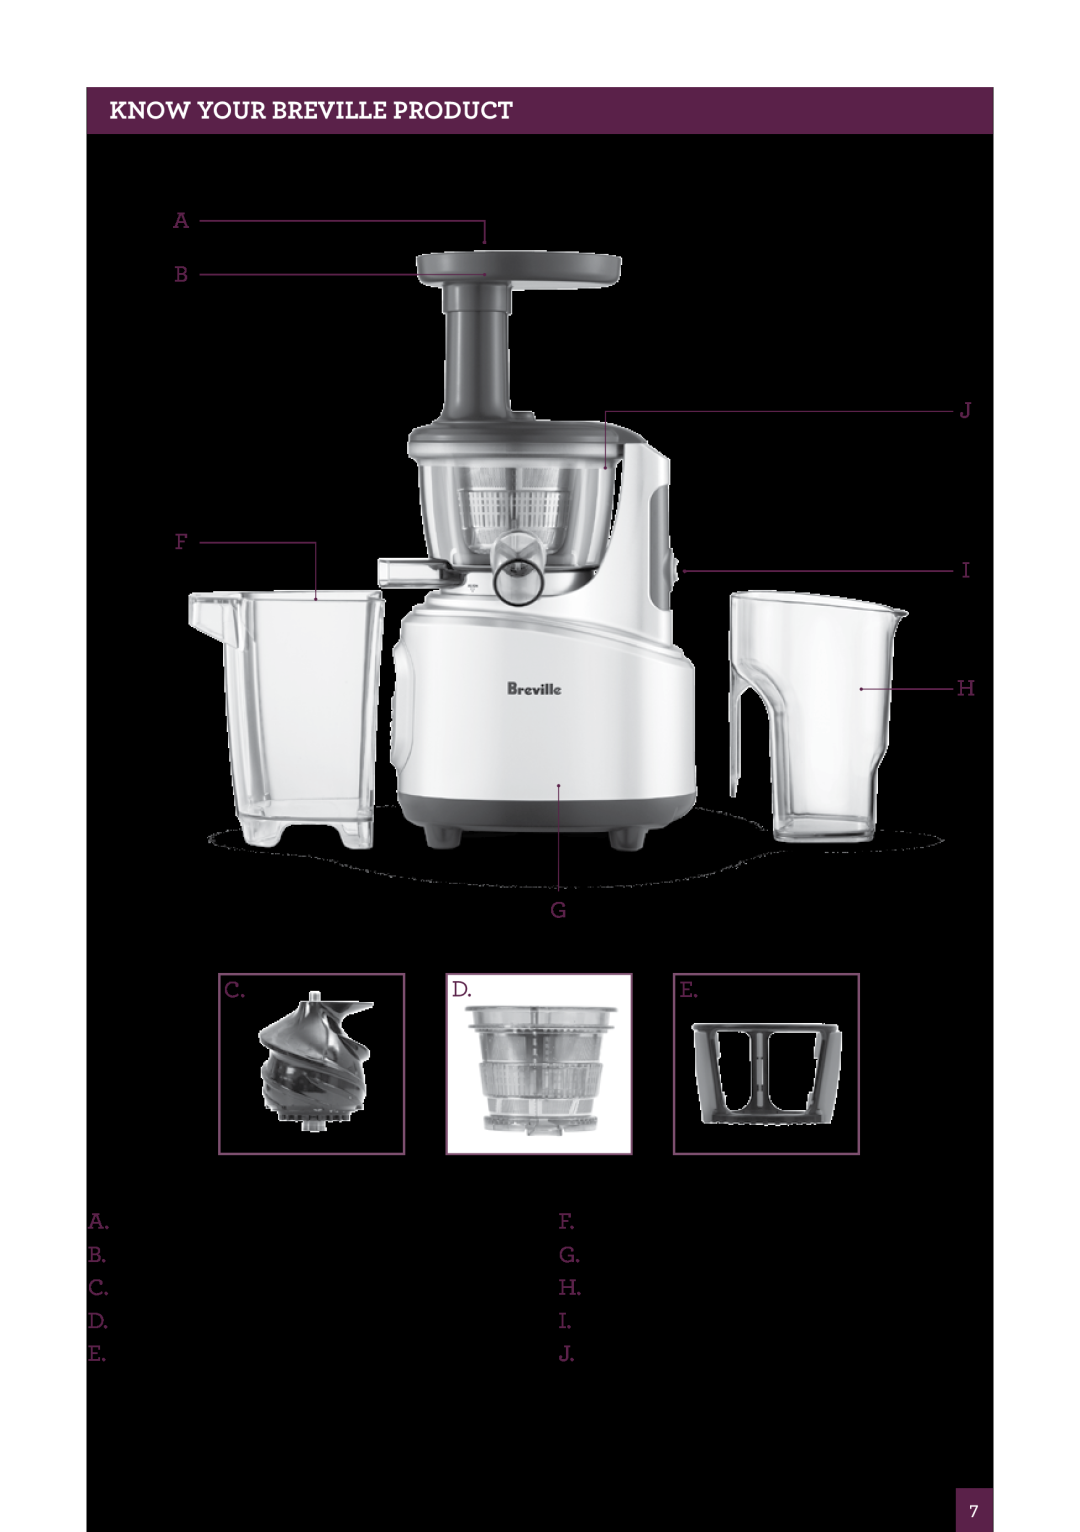 Breville BJS600XL manual KNOW your Breville product, A. Food pusher B. Hopper and lid C. Juicing screw D. Filter basket 